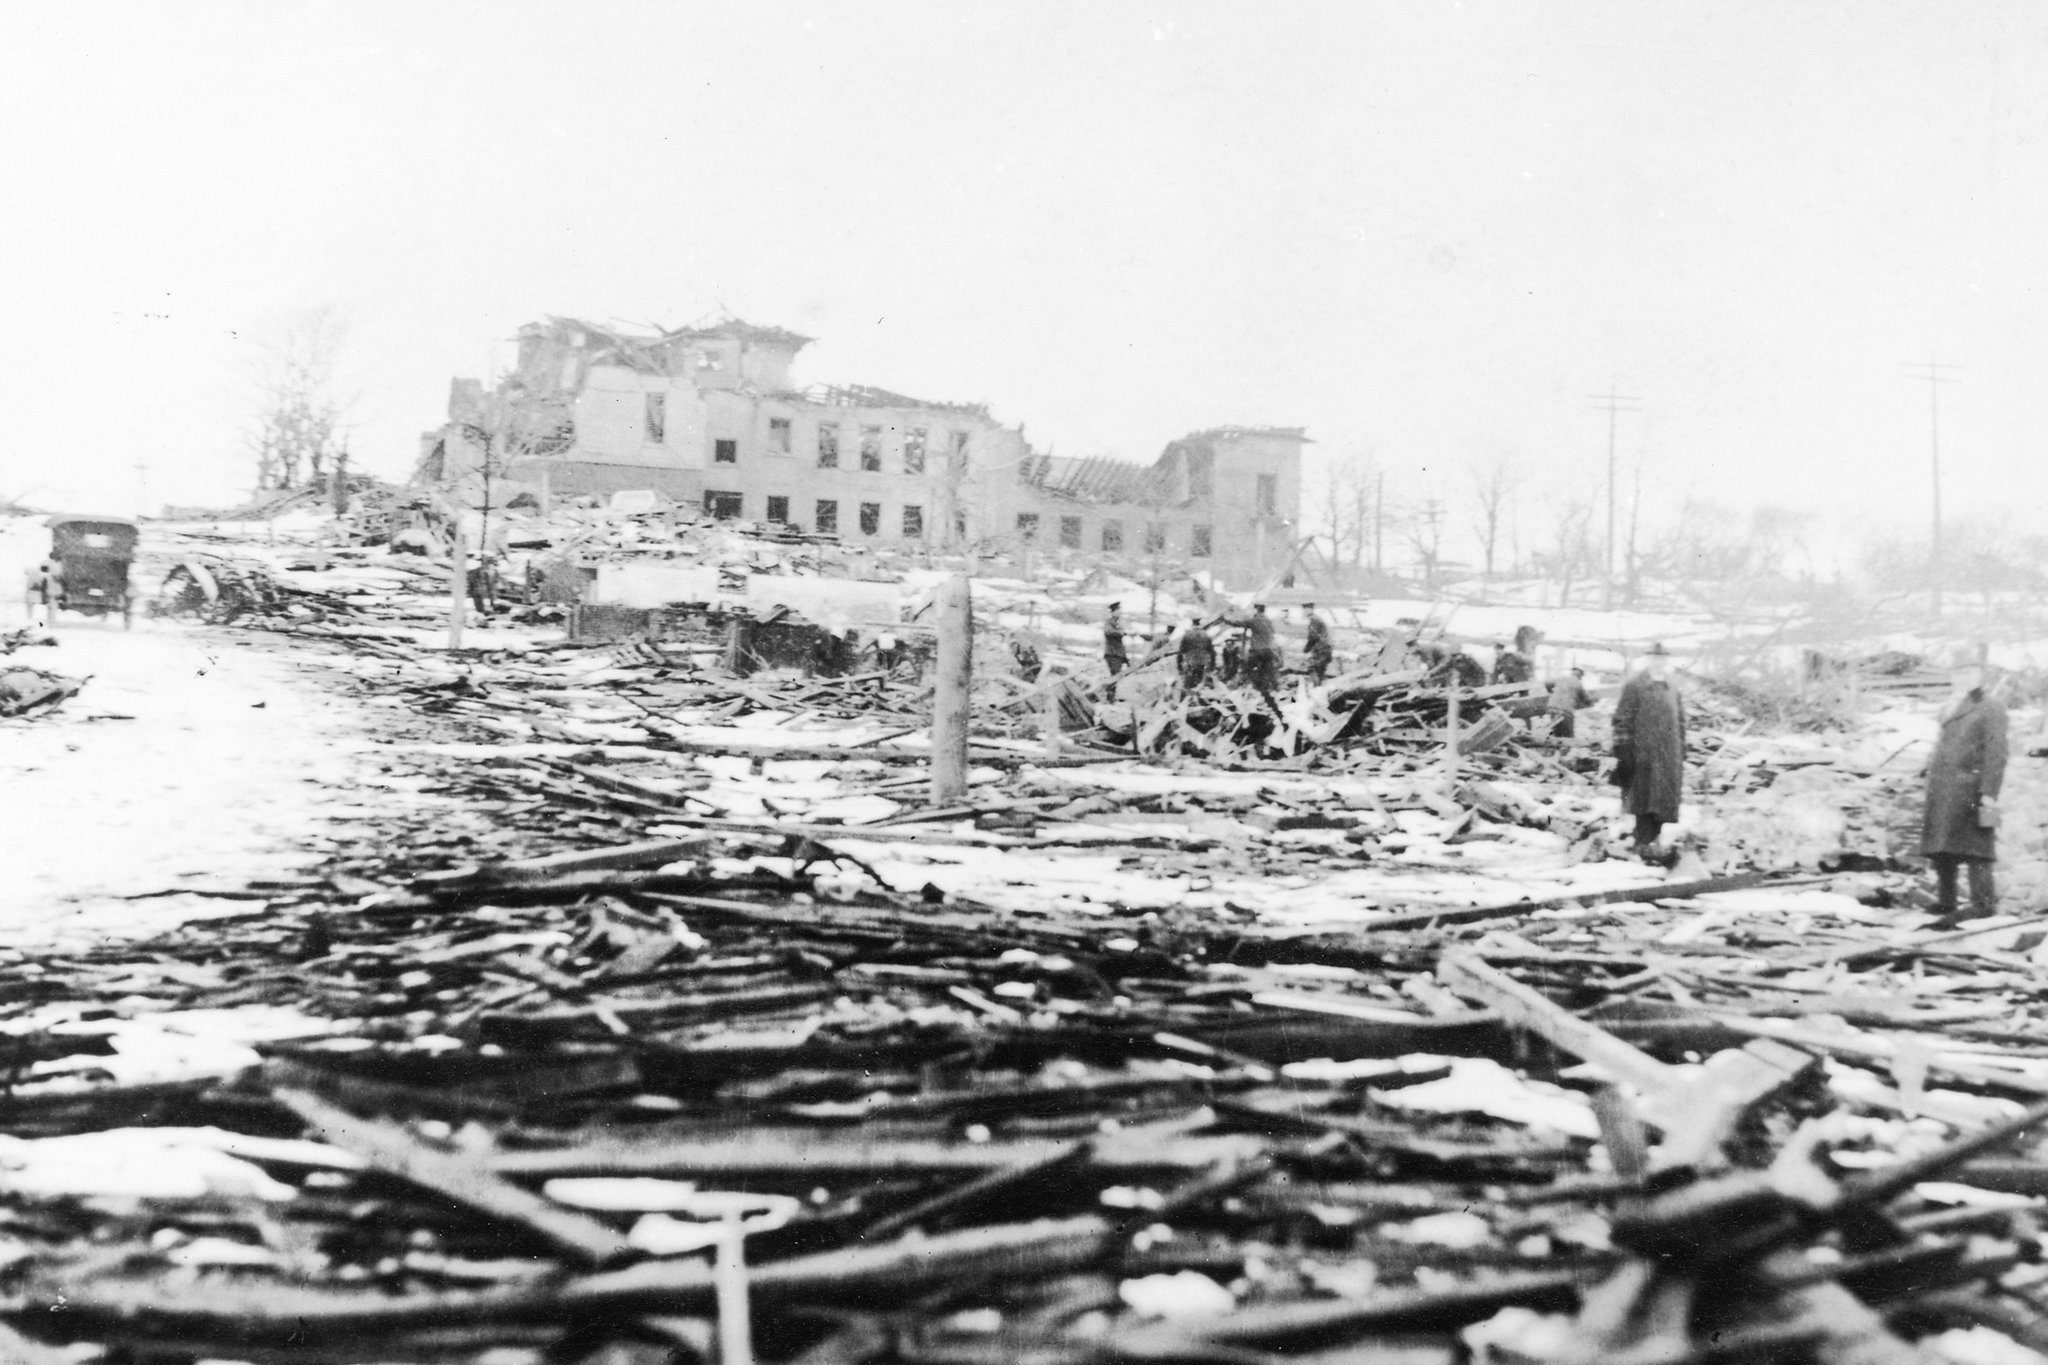 Halifax after the explosion